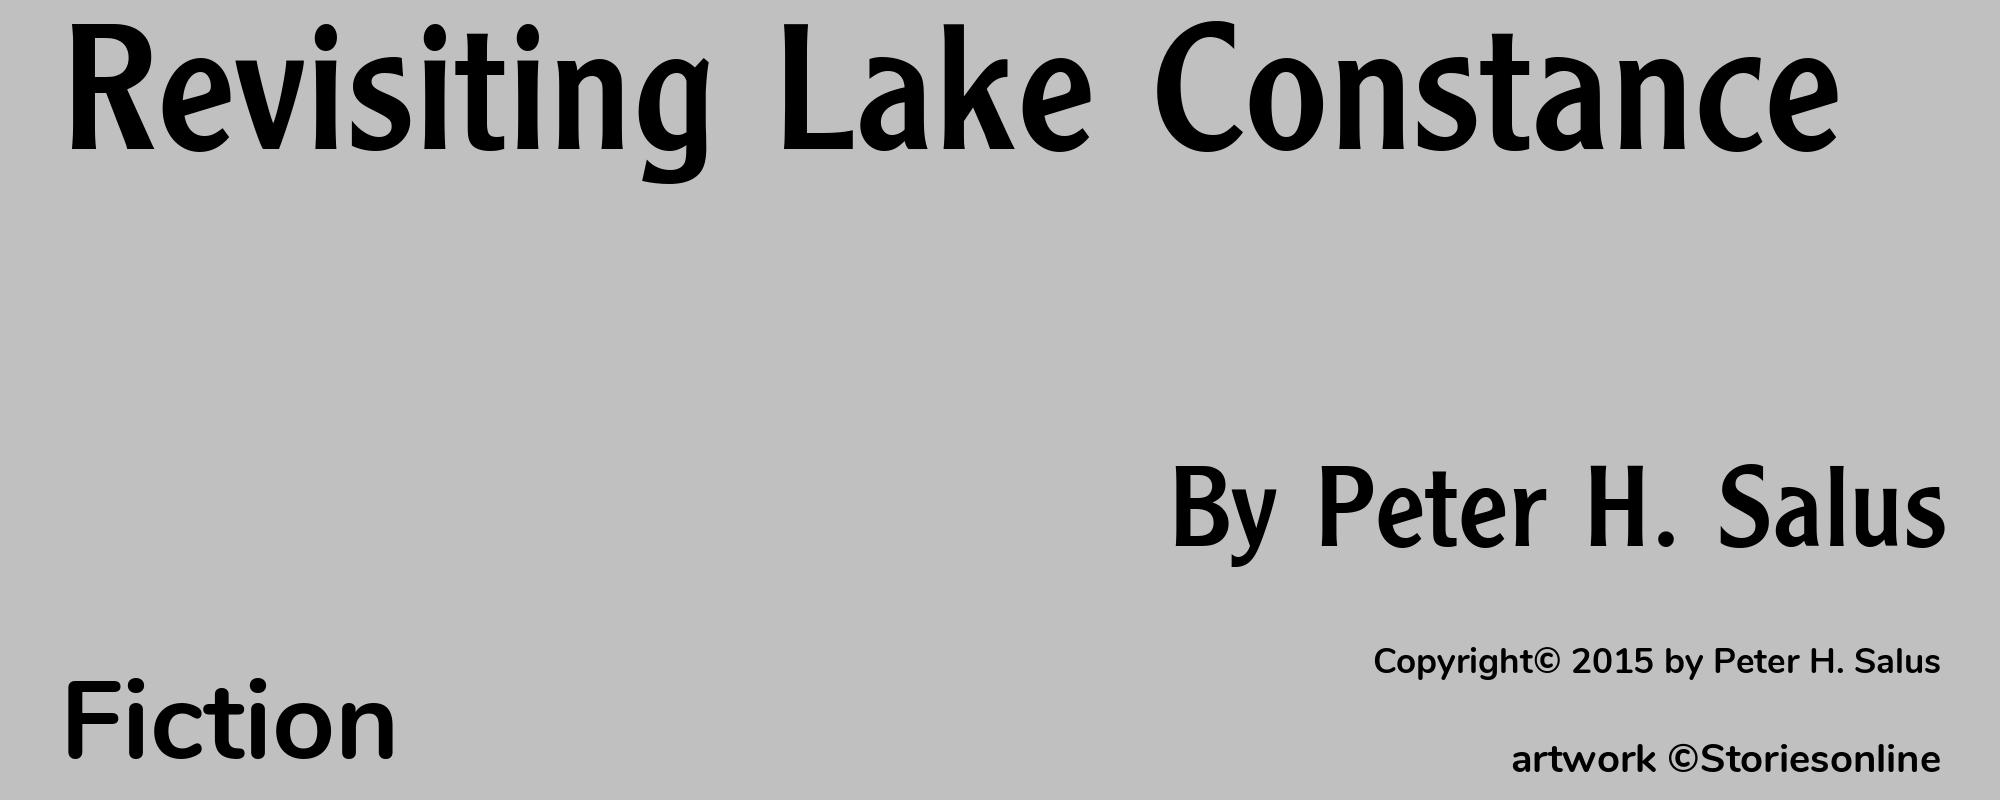 Revisiting Lake Constance - Cover